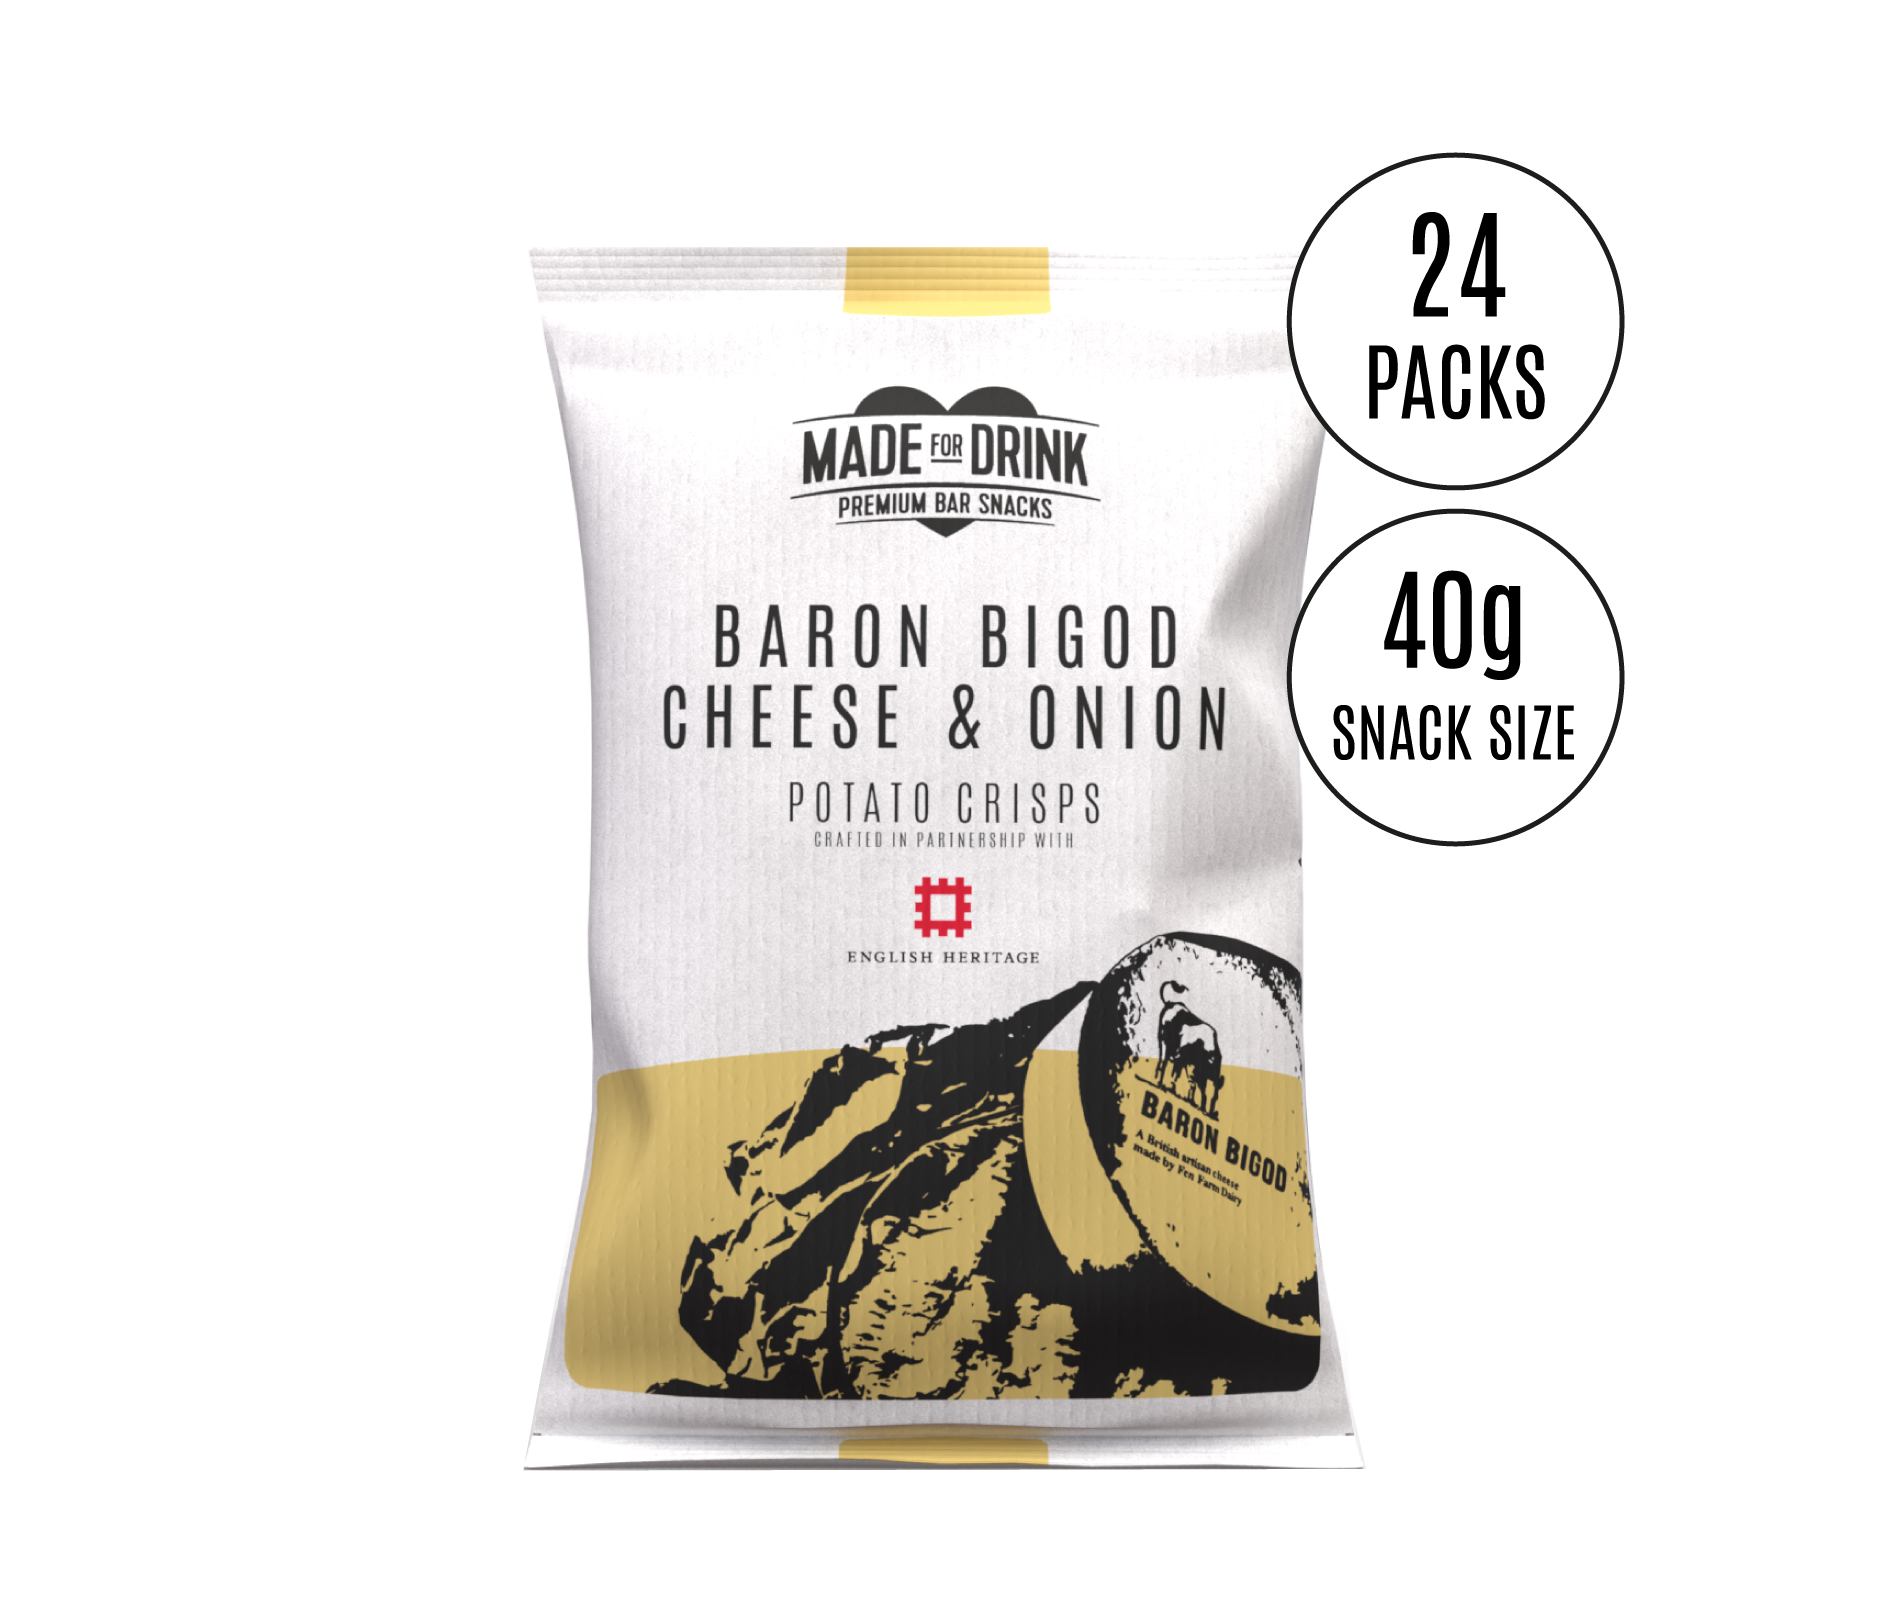 A 40g pack of Made For Drink's Baron Bigod Cheese & Onion Crisps. 24 packs in each box.